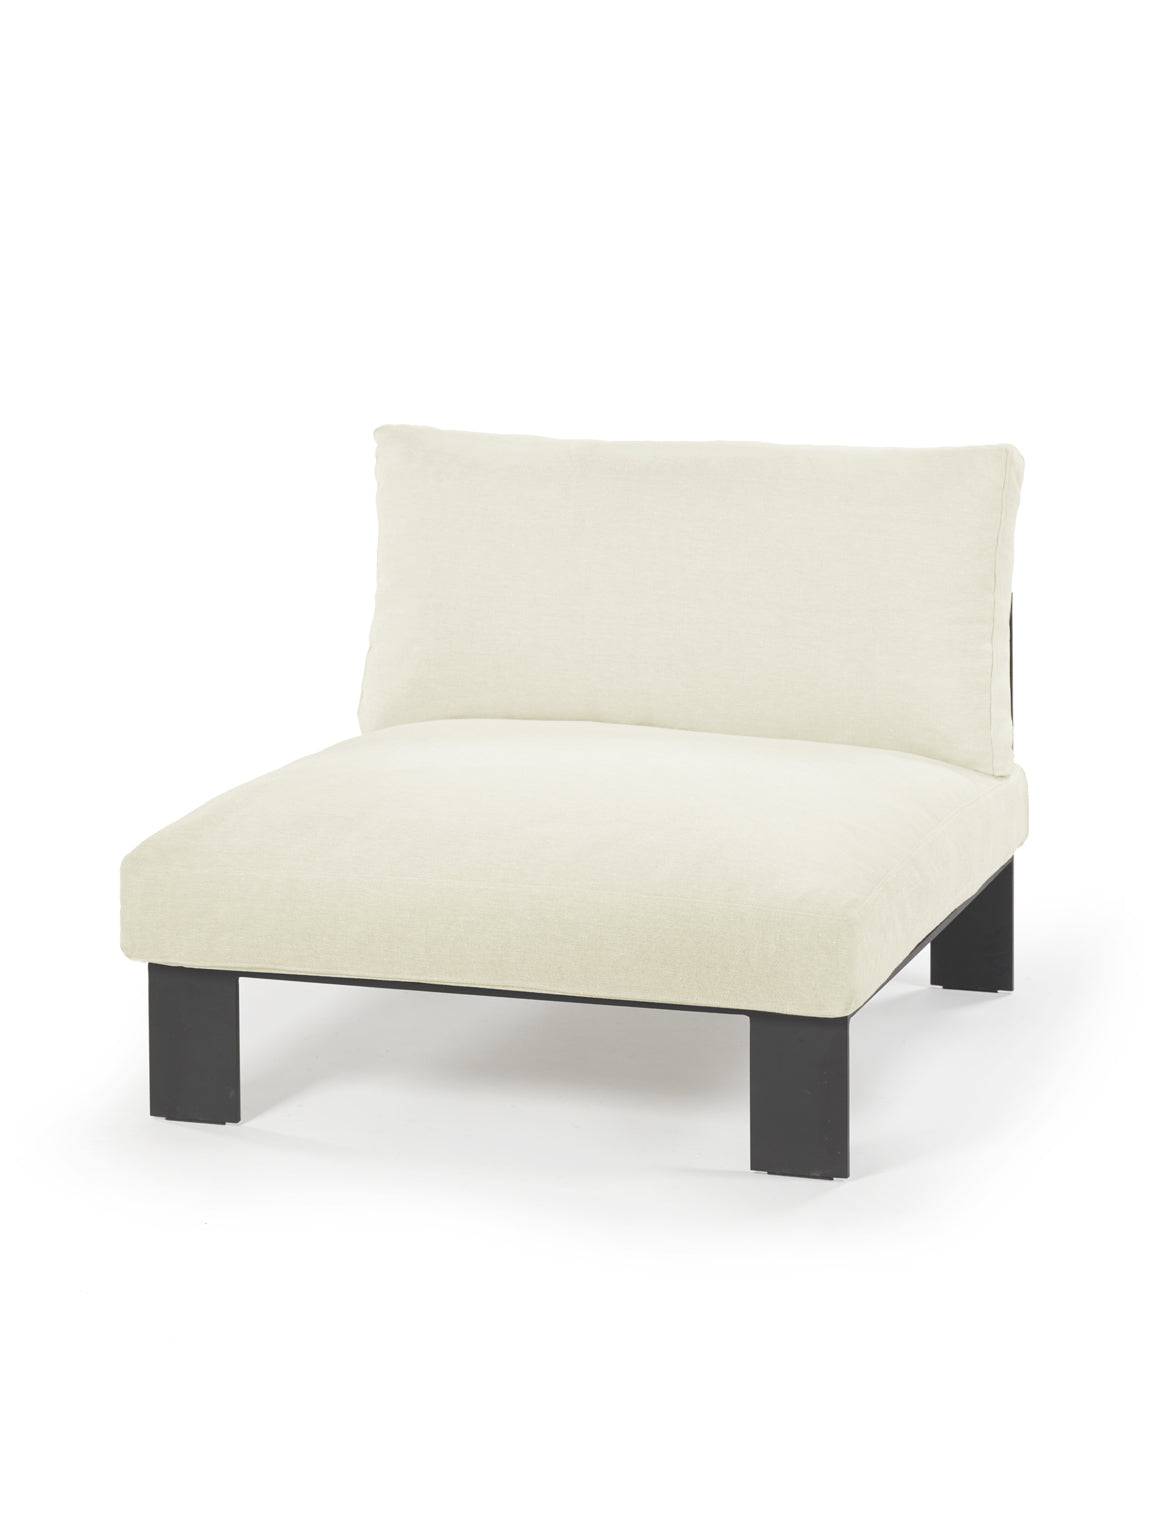 Mombaers Lounge Chair - White